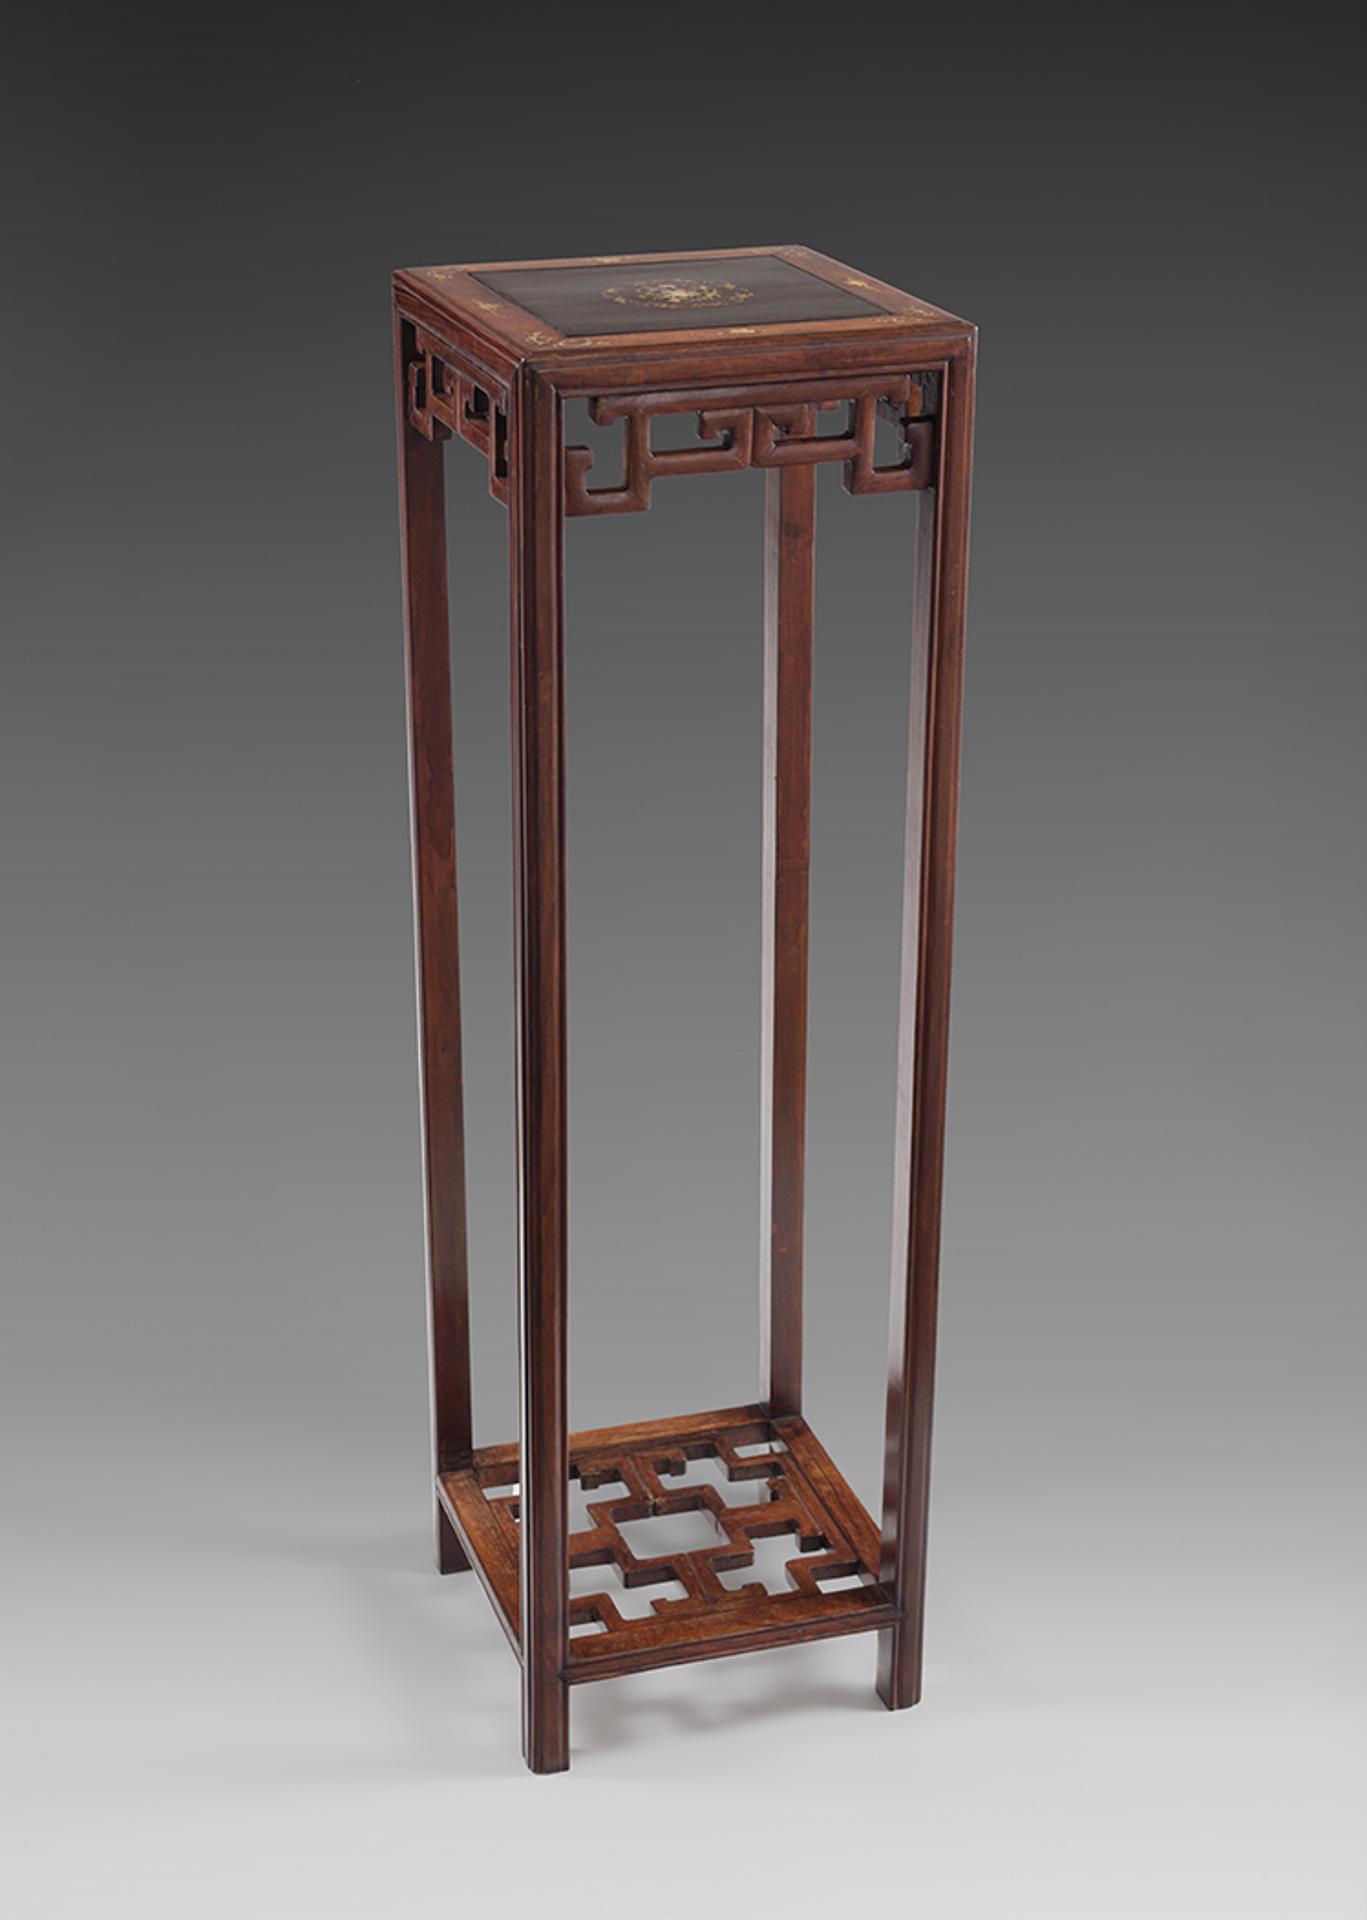 Chinese Art - Chinese Rosewood and Mother-of-Pearl Inlay Plant Stand, Republican Period, circa 1925